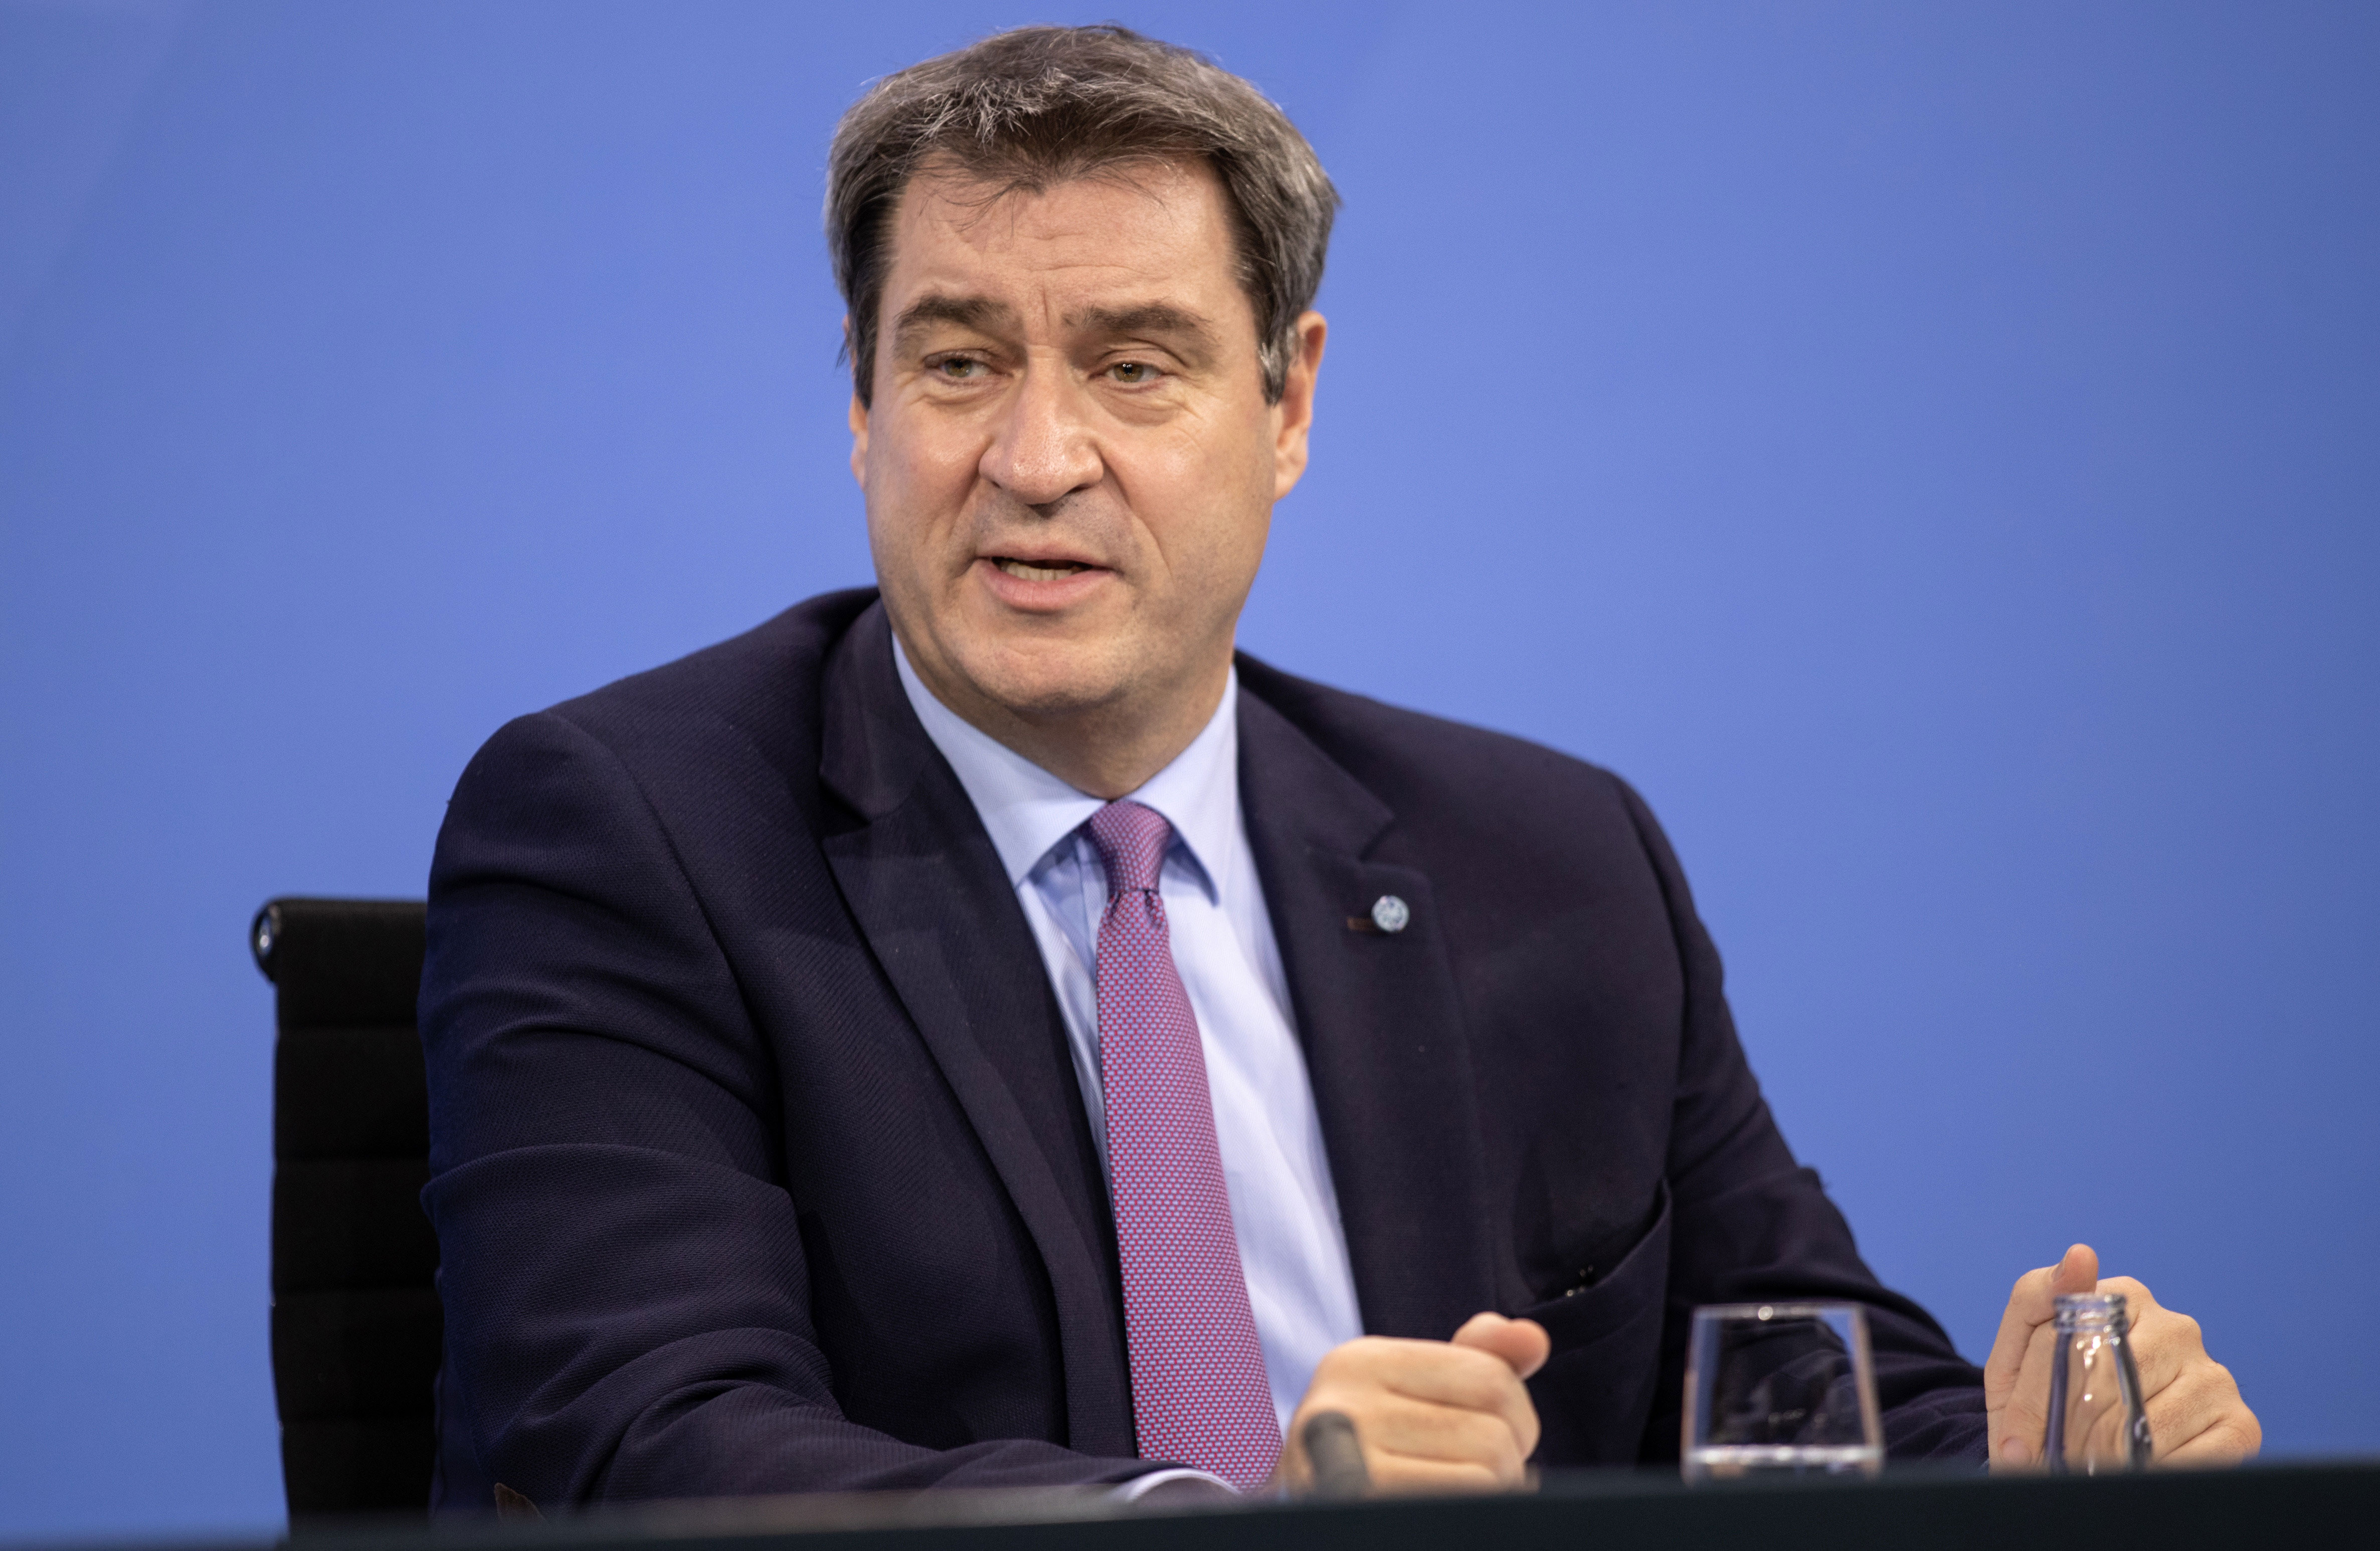 Markus Soeder, Bavarian prime minister, holds a press conference on January 5 in Berlin.